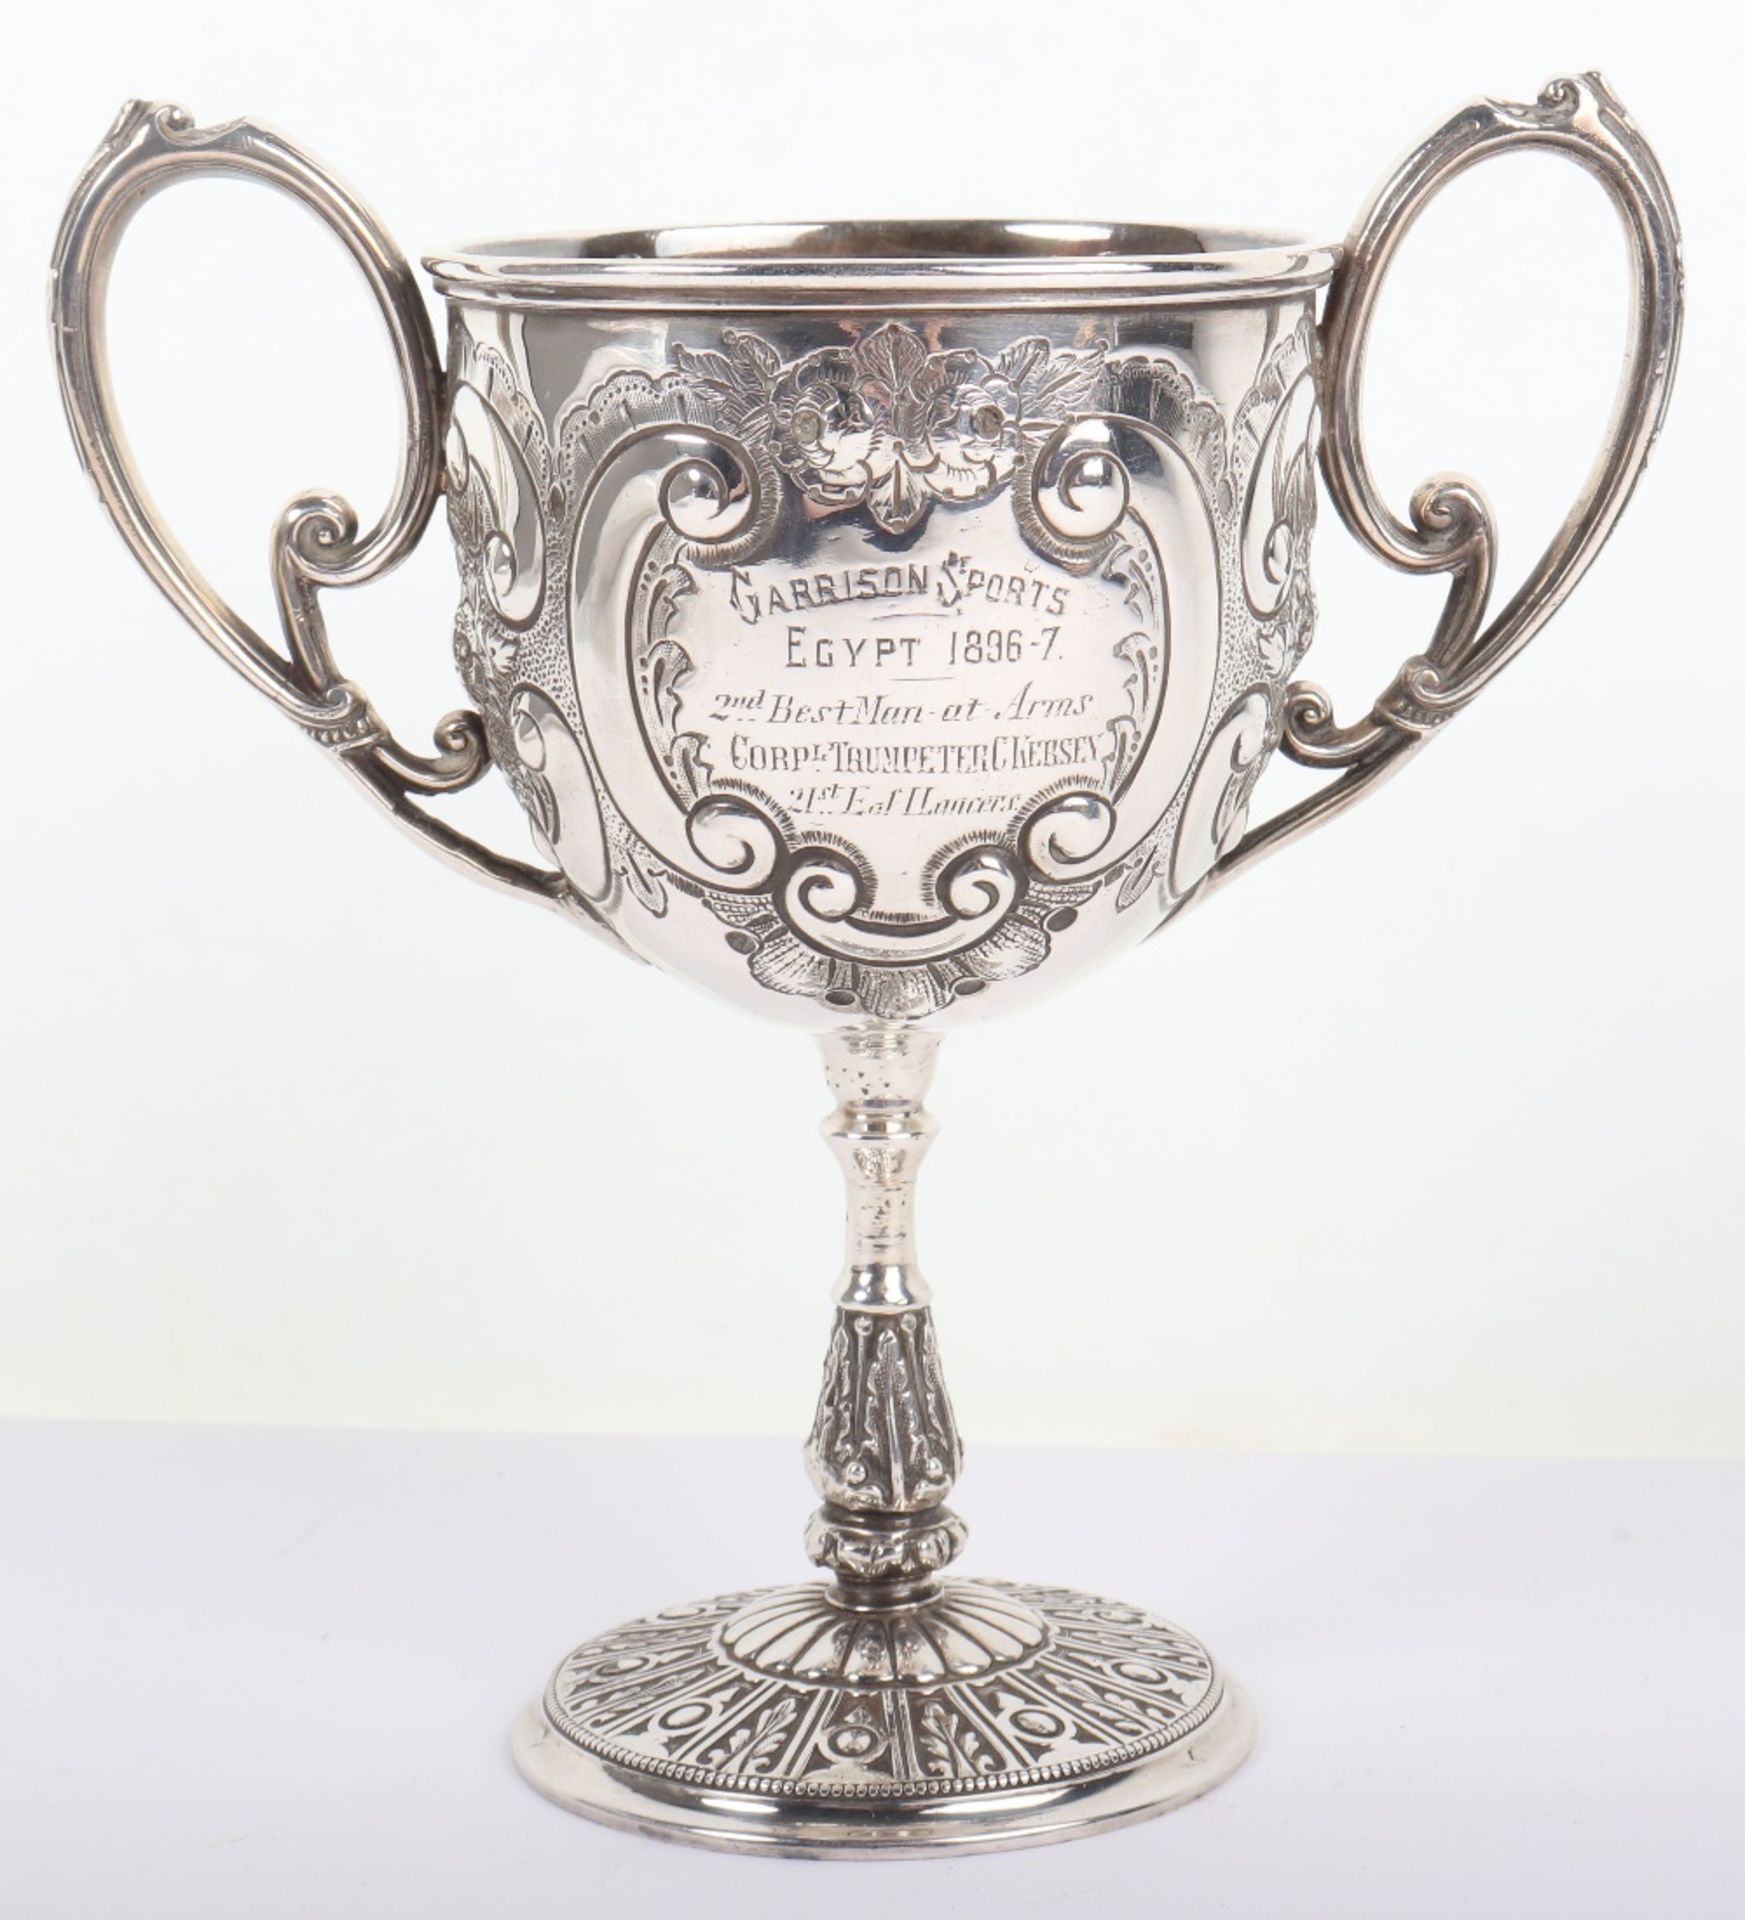 21st Empress of India Lancers Garrison Sports Cup Egypt 1896-7